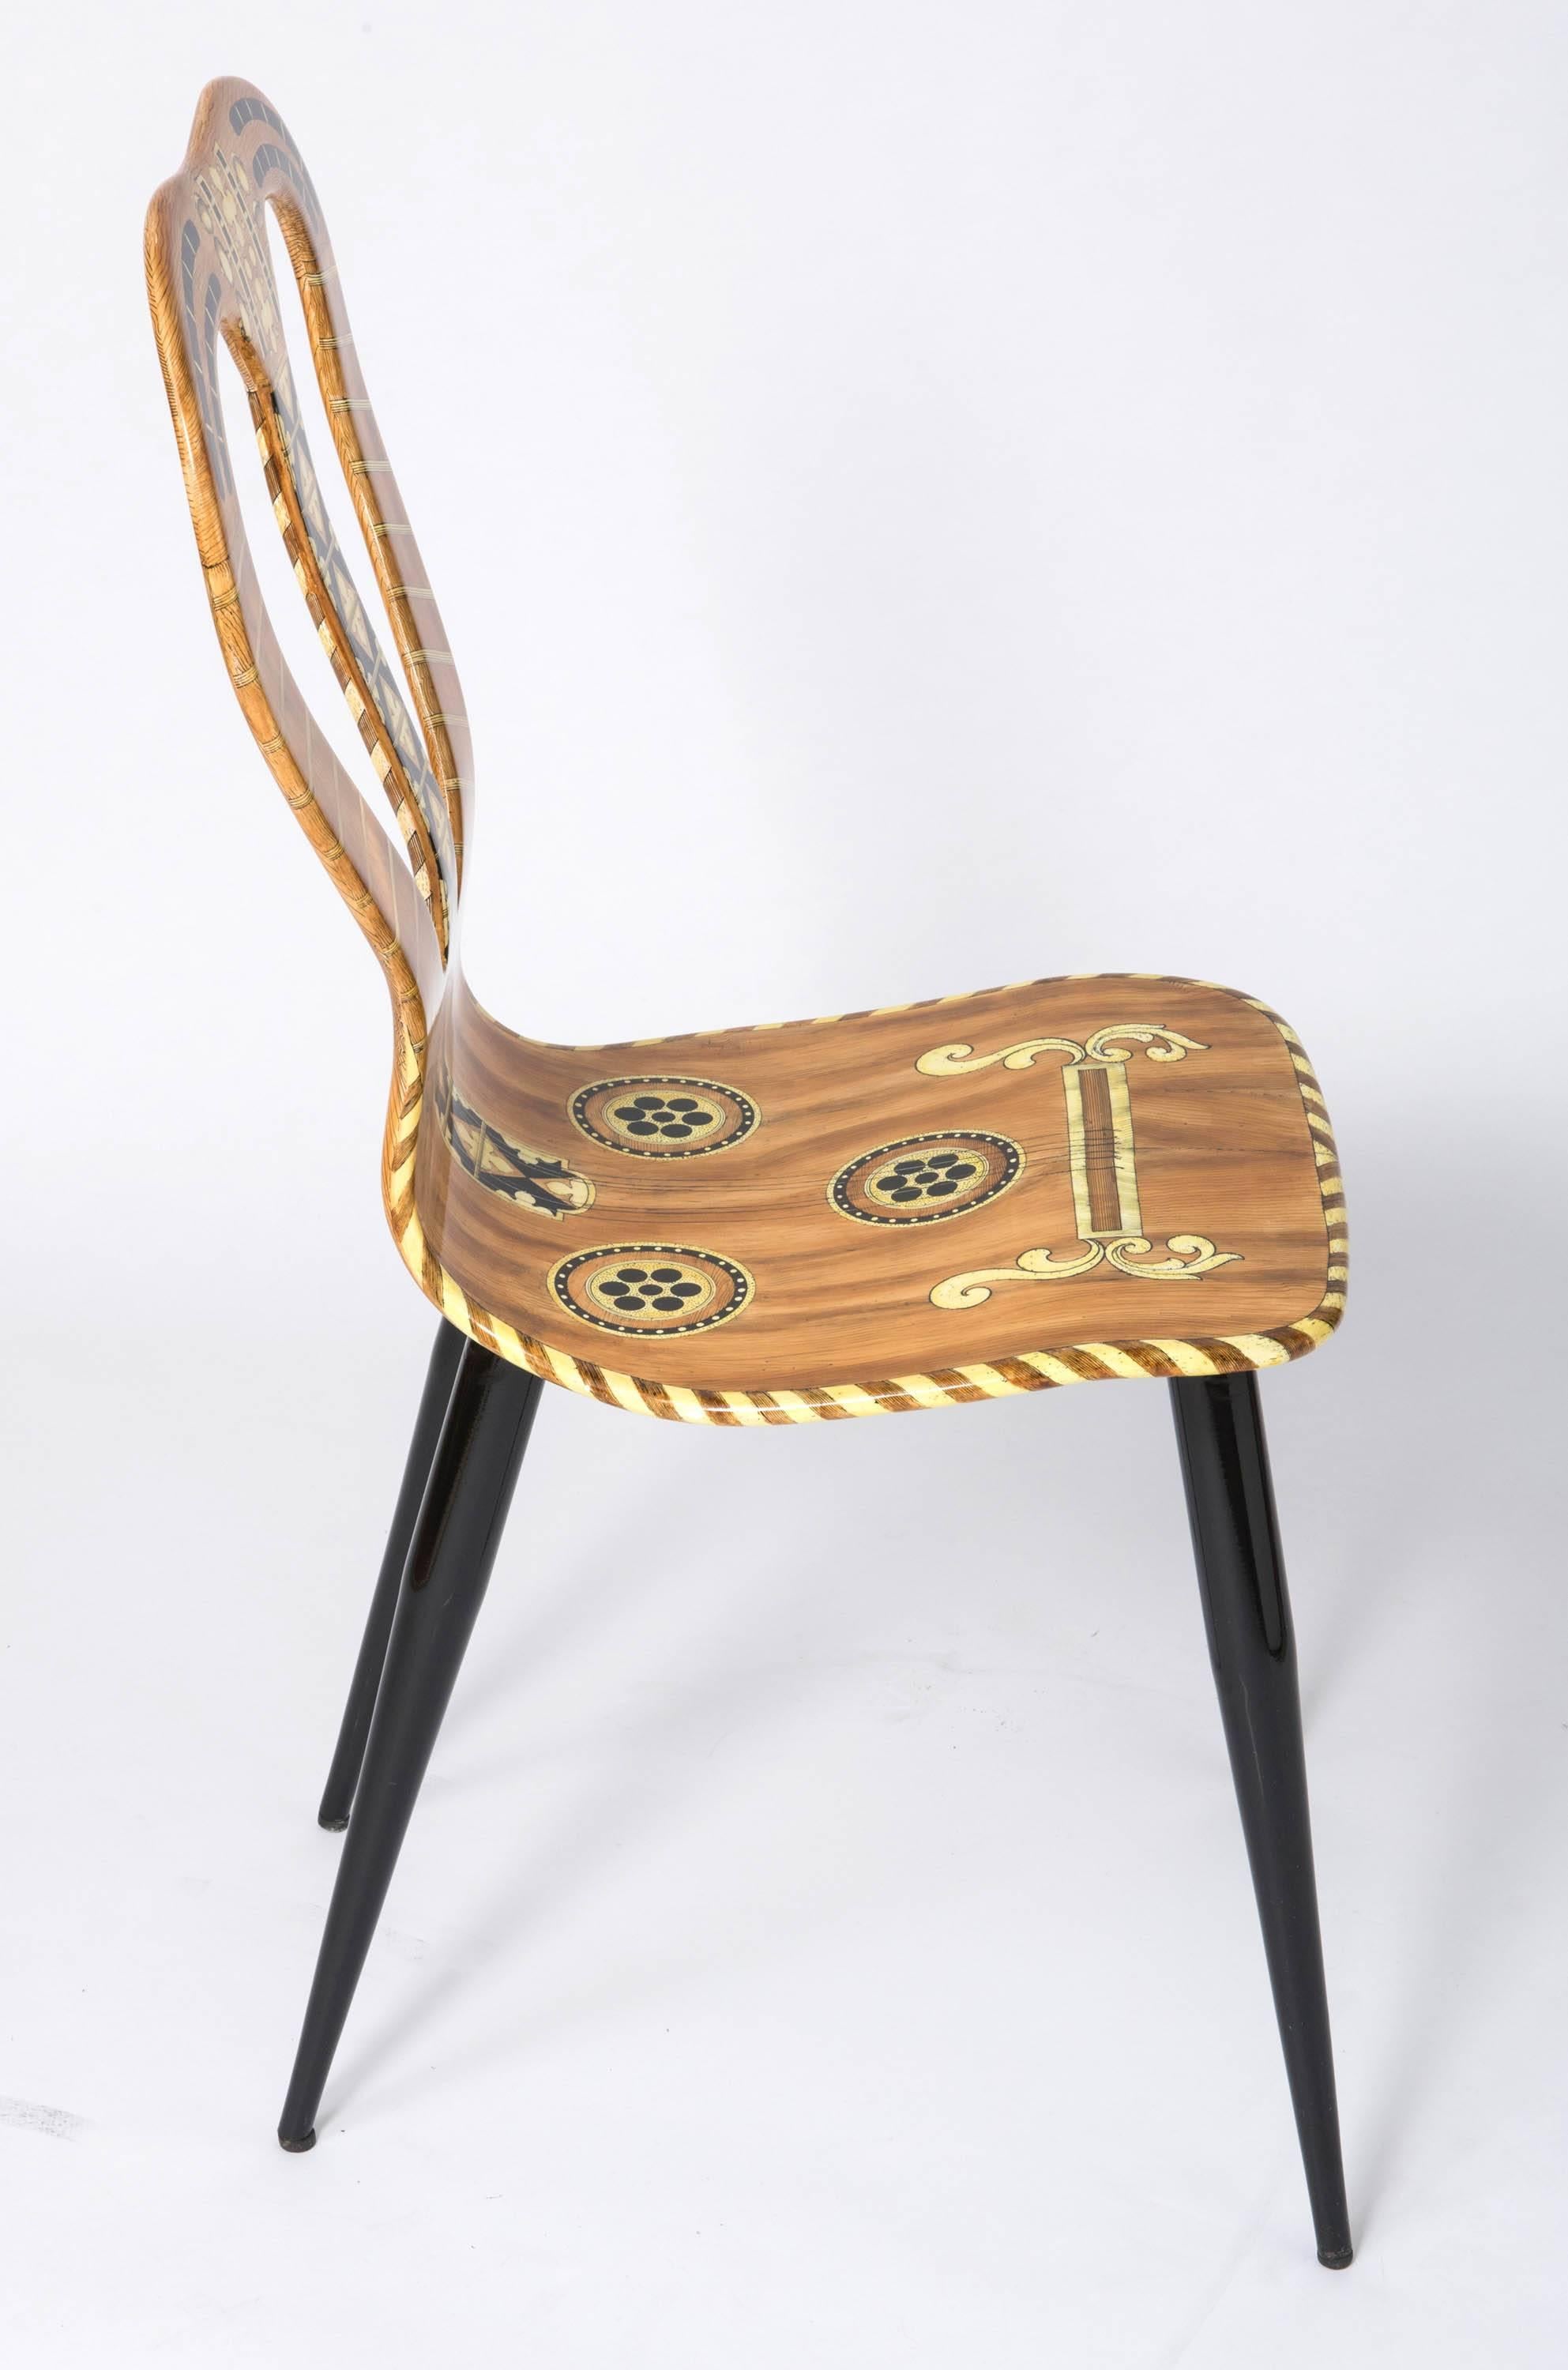 A “Musicale” chair by Atelier Fornasetti.
Lithographically printed. Hand coloured
Wood, lacquer, metal tubular legs.
Italy, 1989
Marked no. 16-60-89 Naty
95.5 cm high x 41 cm wide x 40 cm deep.
 